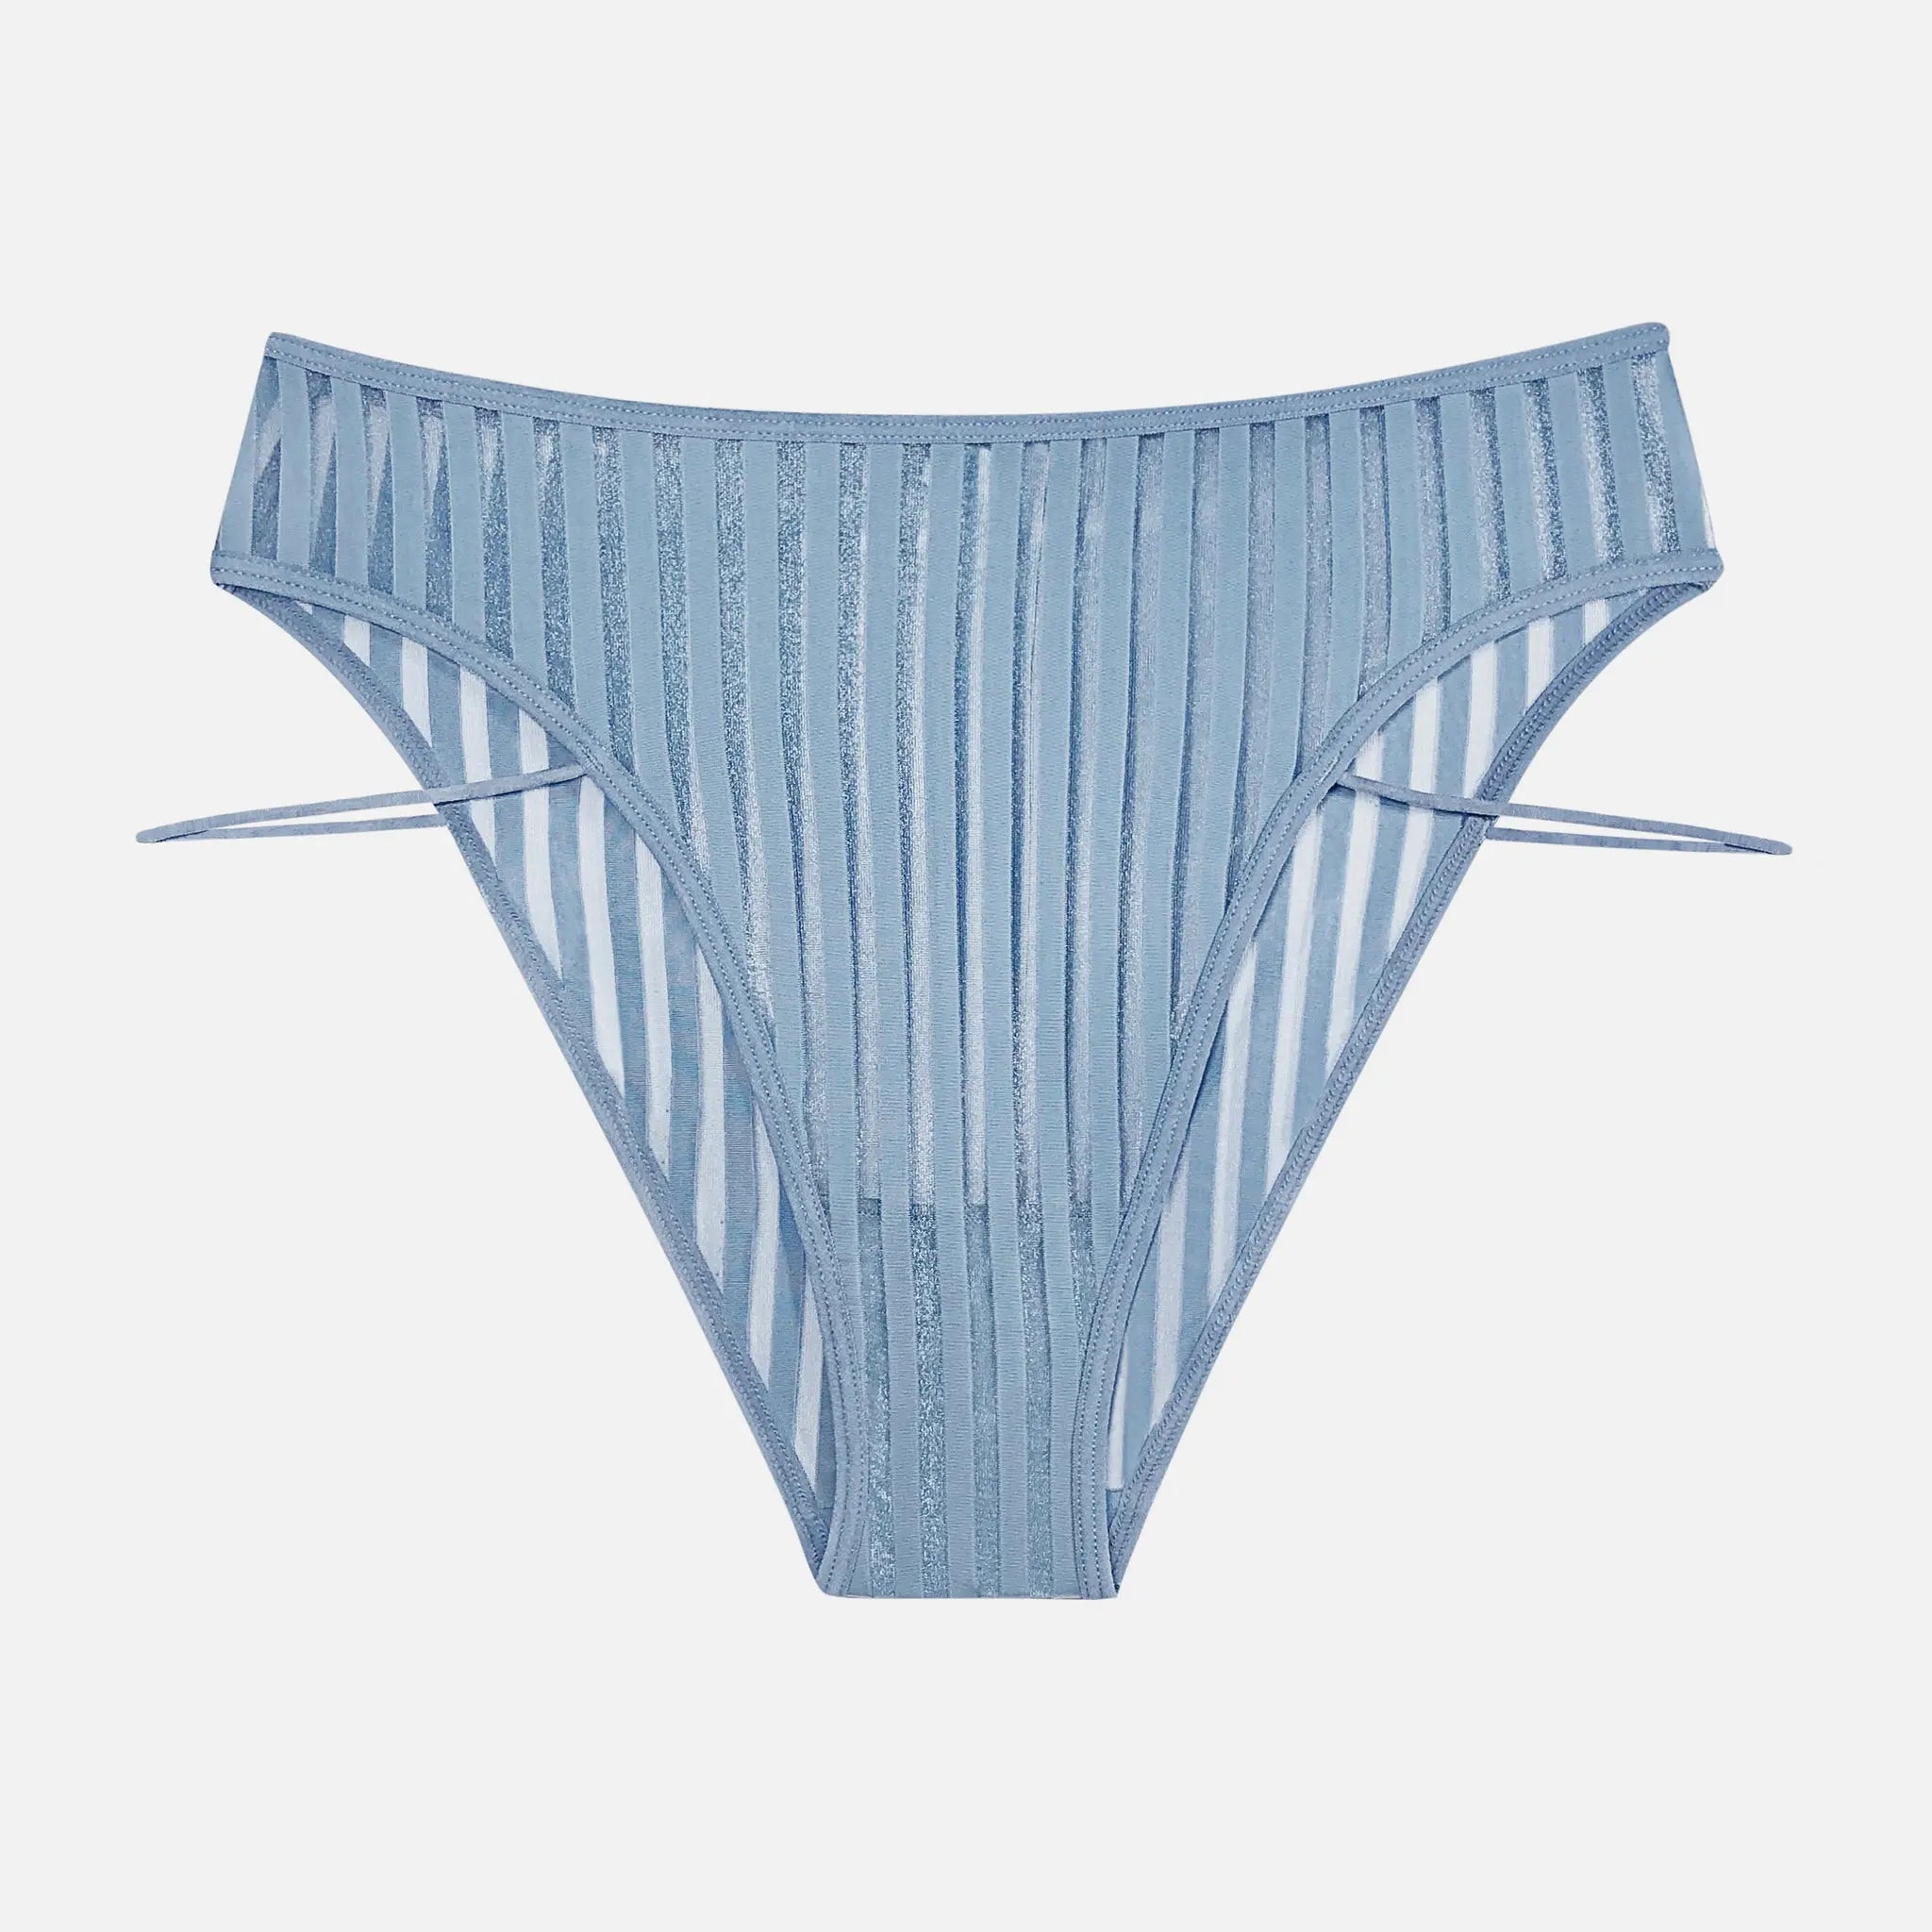 Le Body Perforated Knit Panty